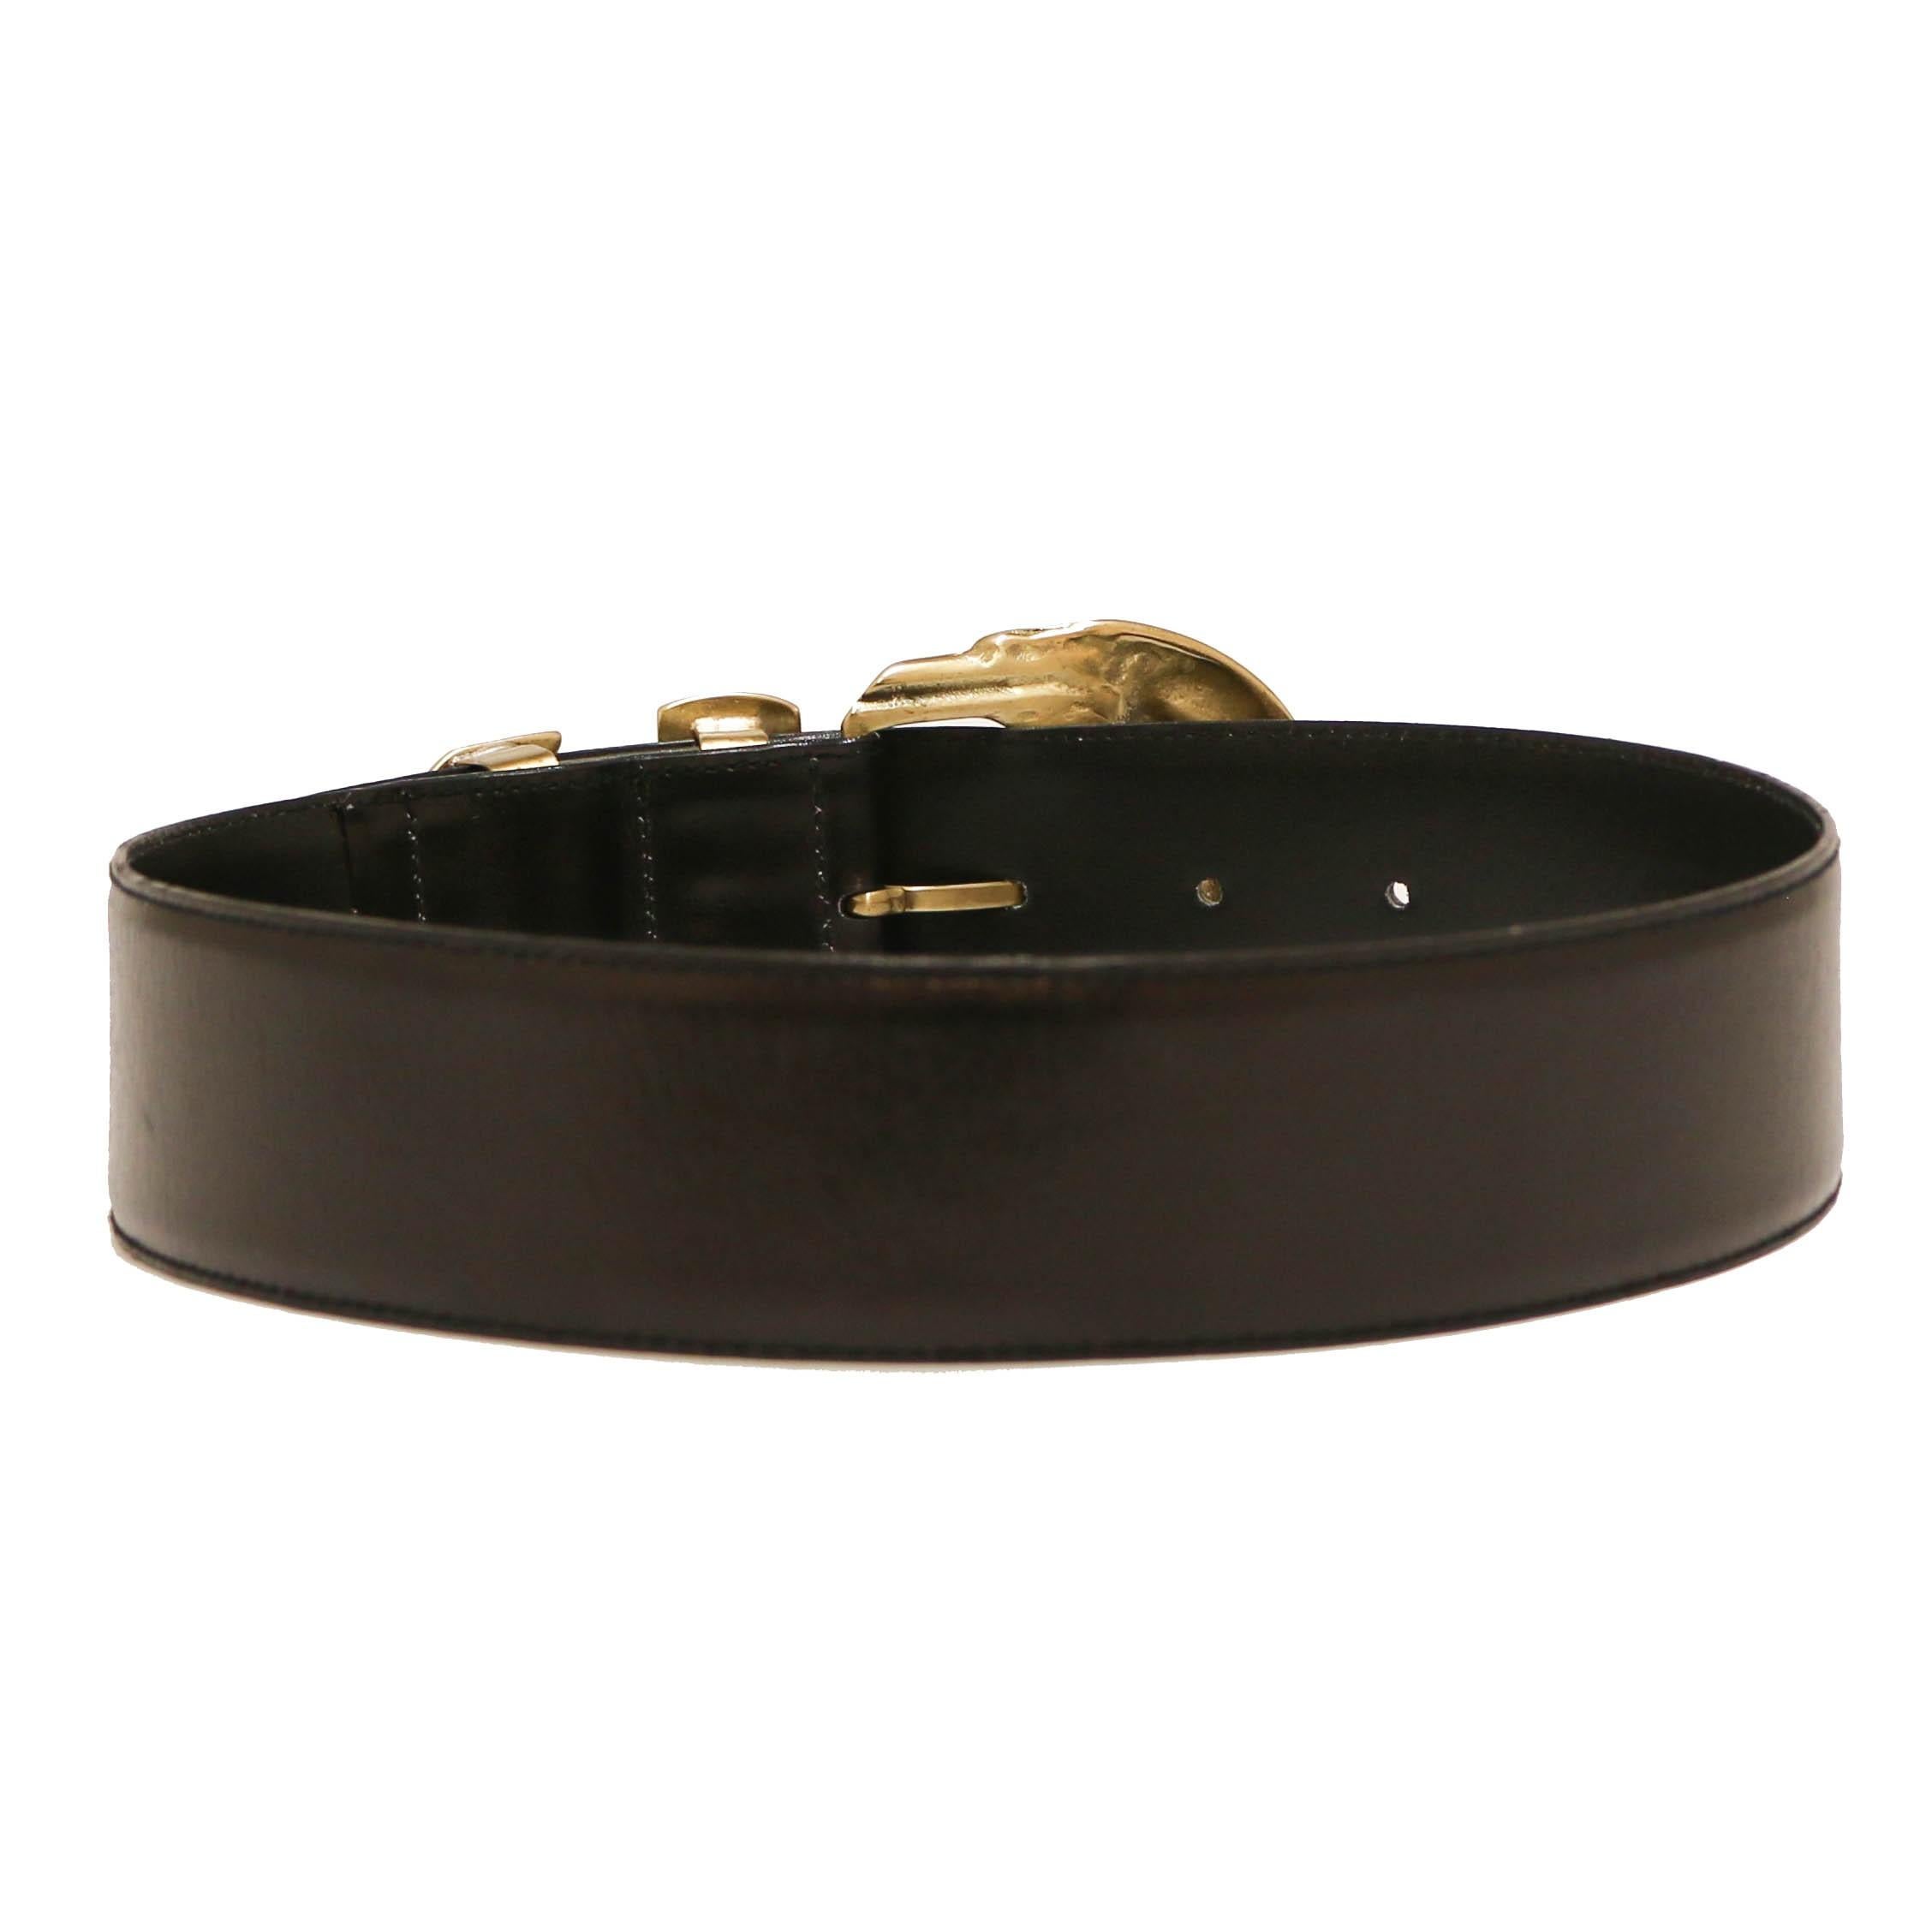 Exceptional! Vintage GIANNI VERSACE belt in black leather, hardware in gilt metal. The buckle is set with multicolors rhinestones (missing 2 rhinestones see photos).
In very good condition.
Made in Italy.
Size: 65
Length to 1st hole, last hole: 62 -